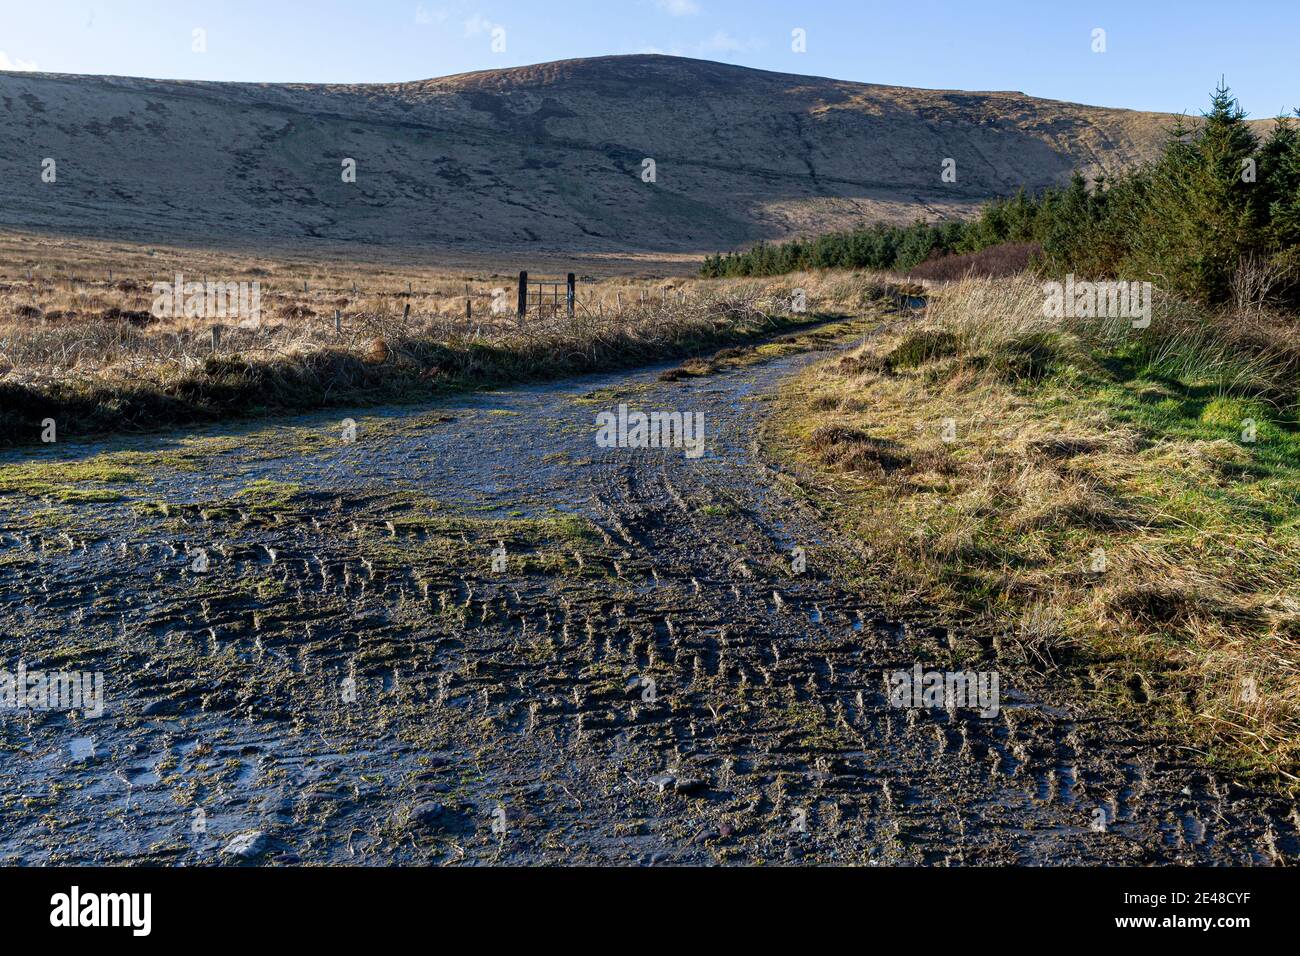 Sheep on dirt track road in County Kerry Ireland Stock Photo